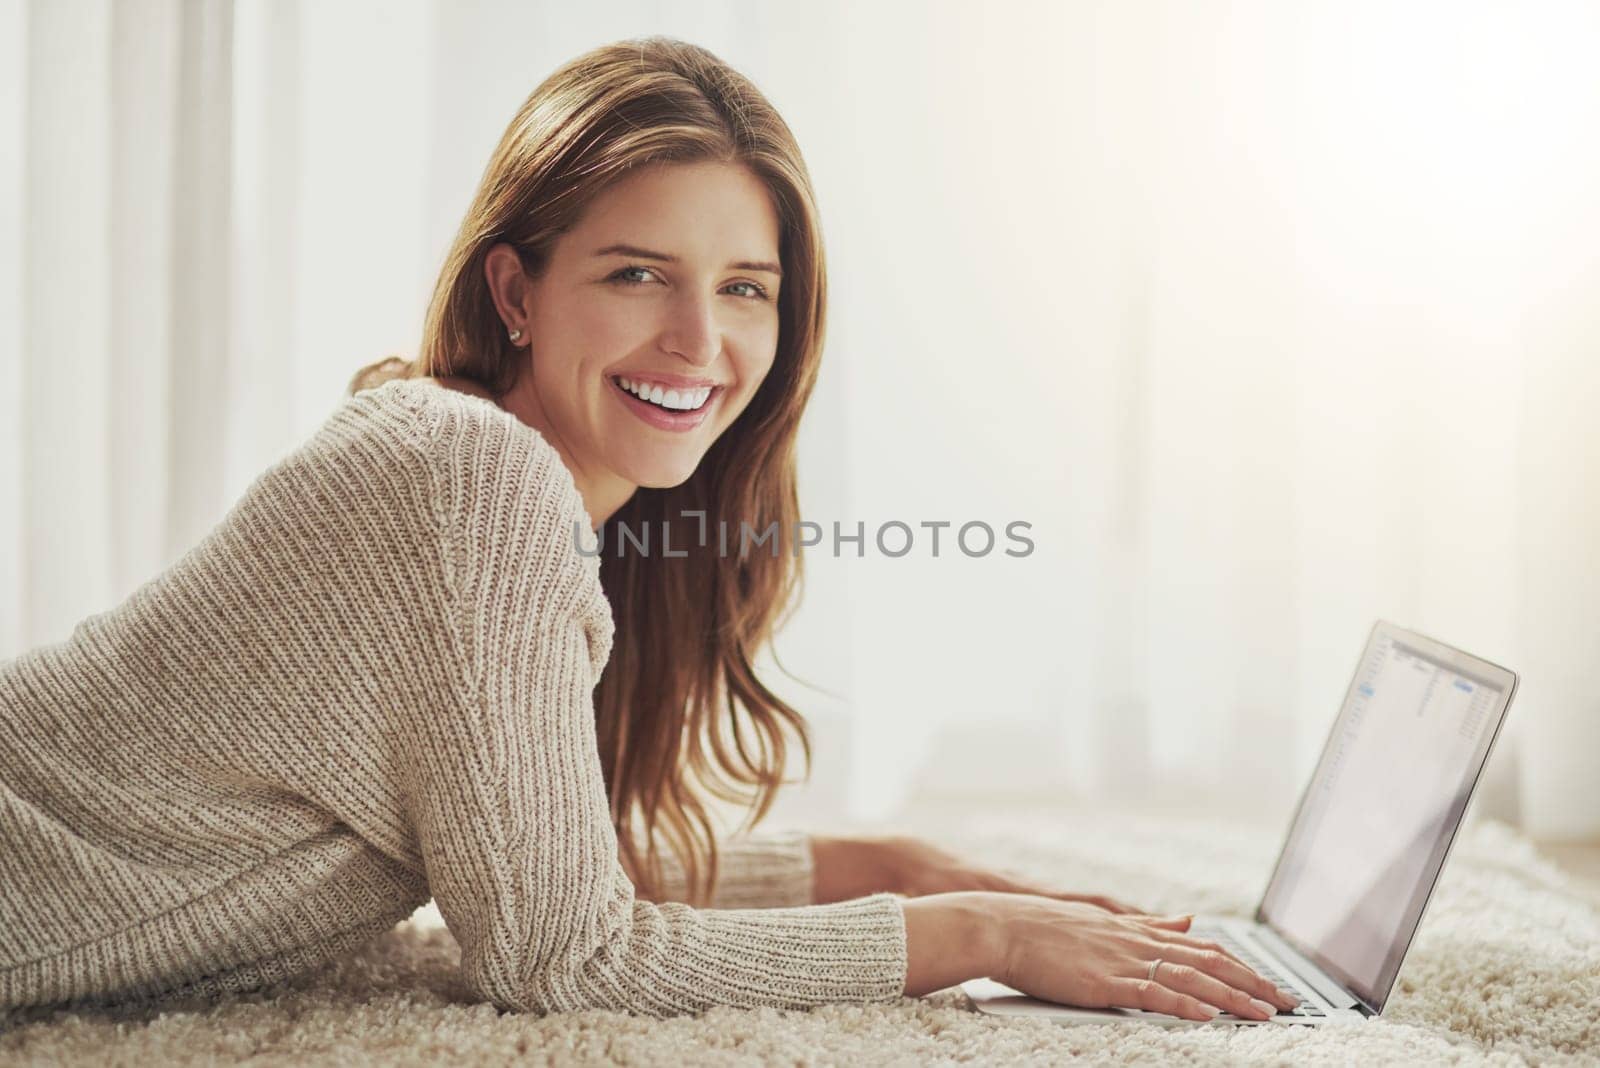 Happy, laptop and portrait of woman on carpet in home, relax or lying on floor. Computer, face smile and person on ground typing, writing blog for social media or email, internet or website in Norway.